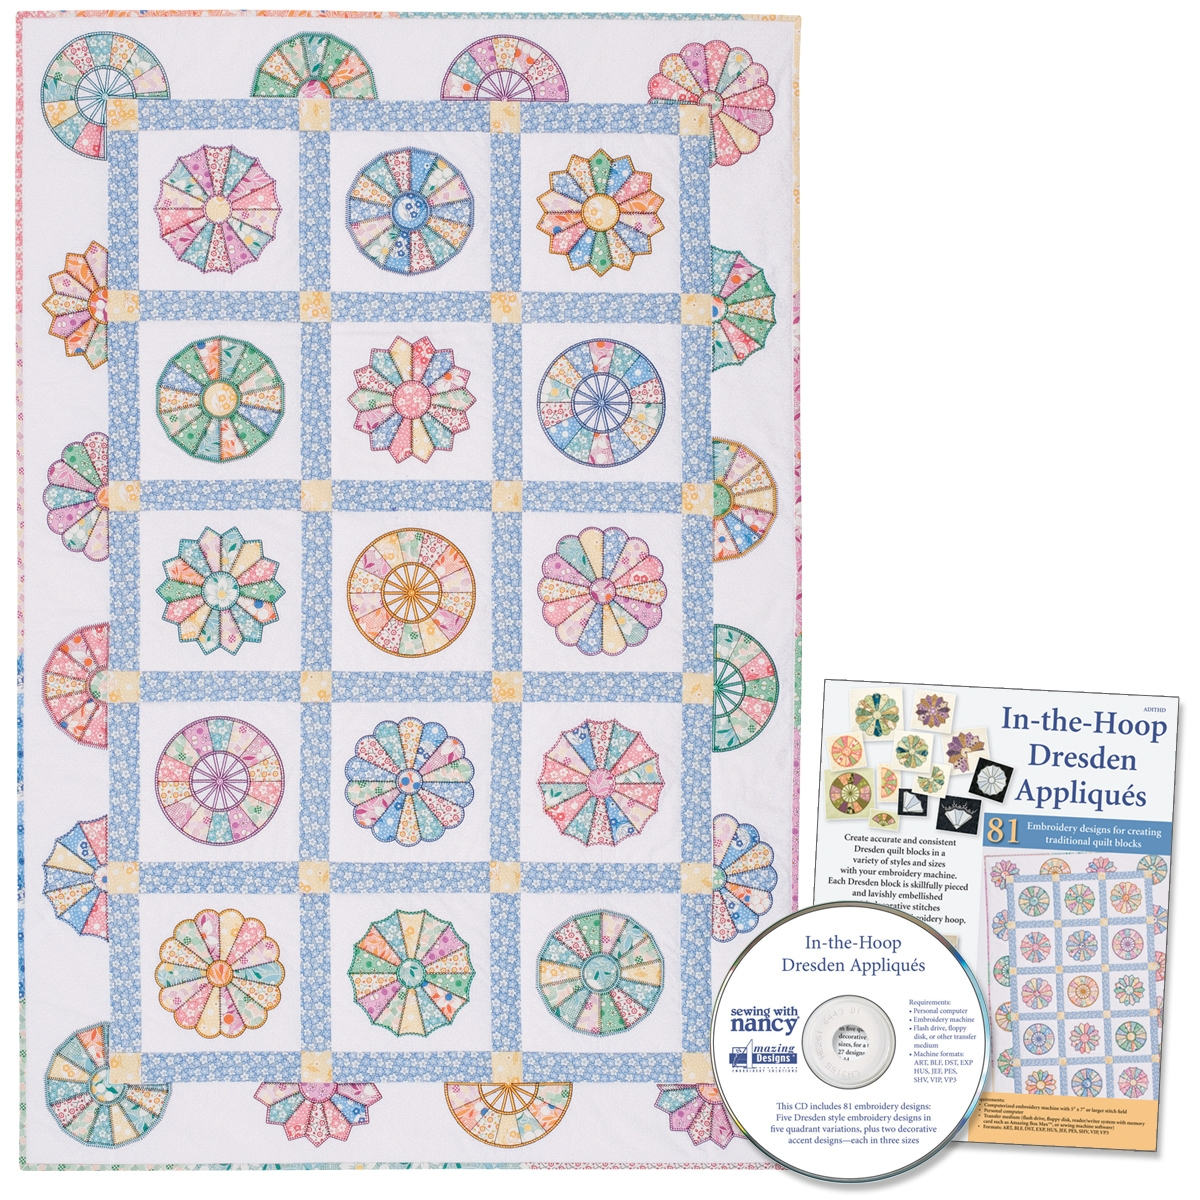 Machine Embroidery Quilt Patterns In The Hoop Dresden Appliques Embroidery Designs